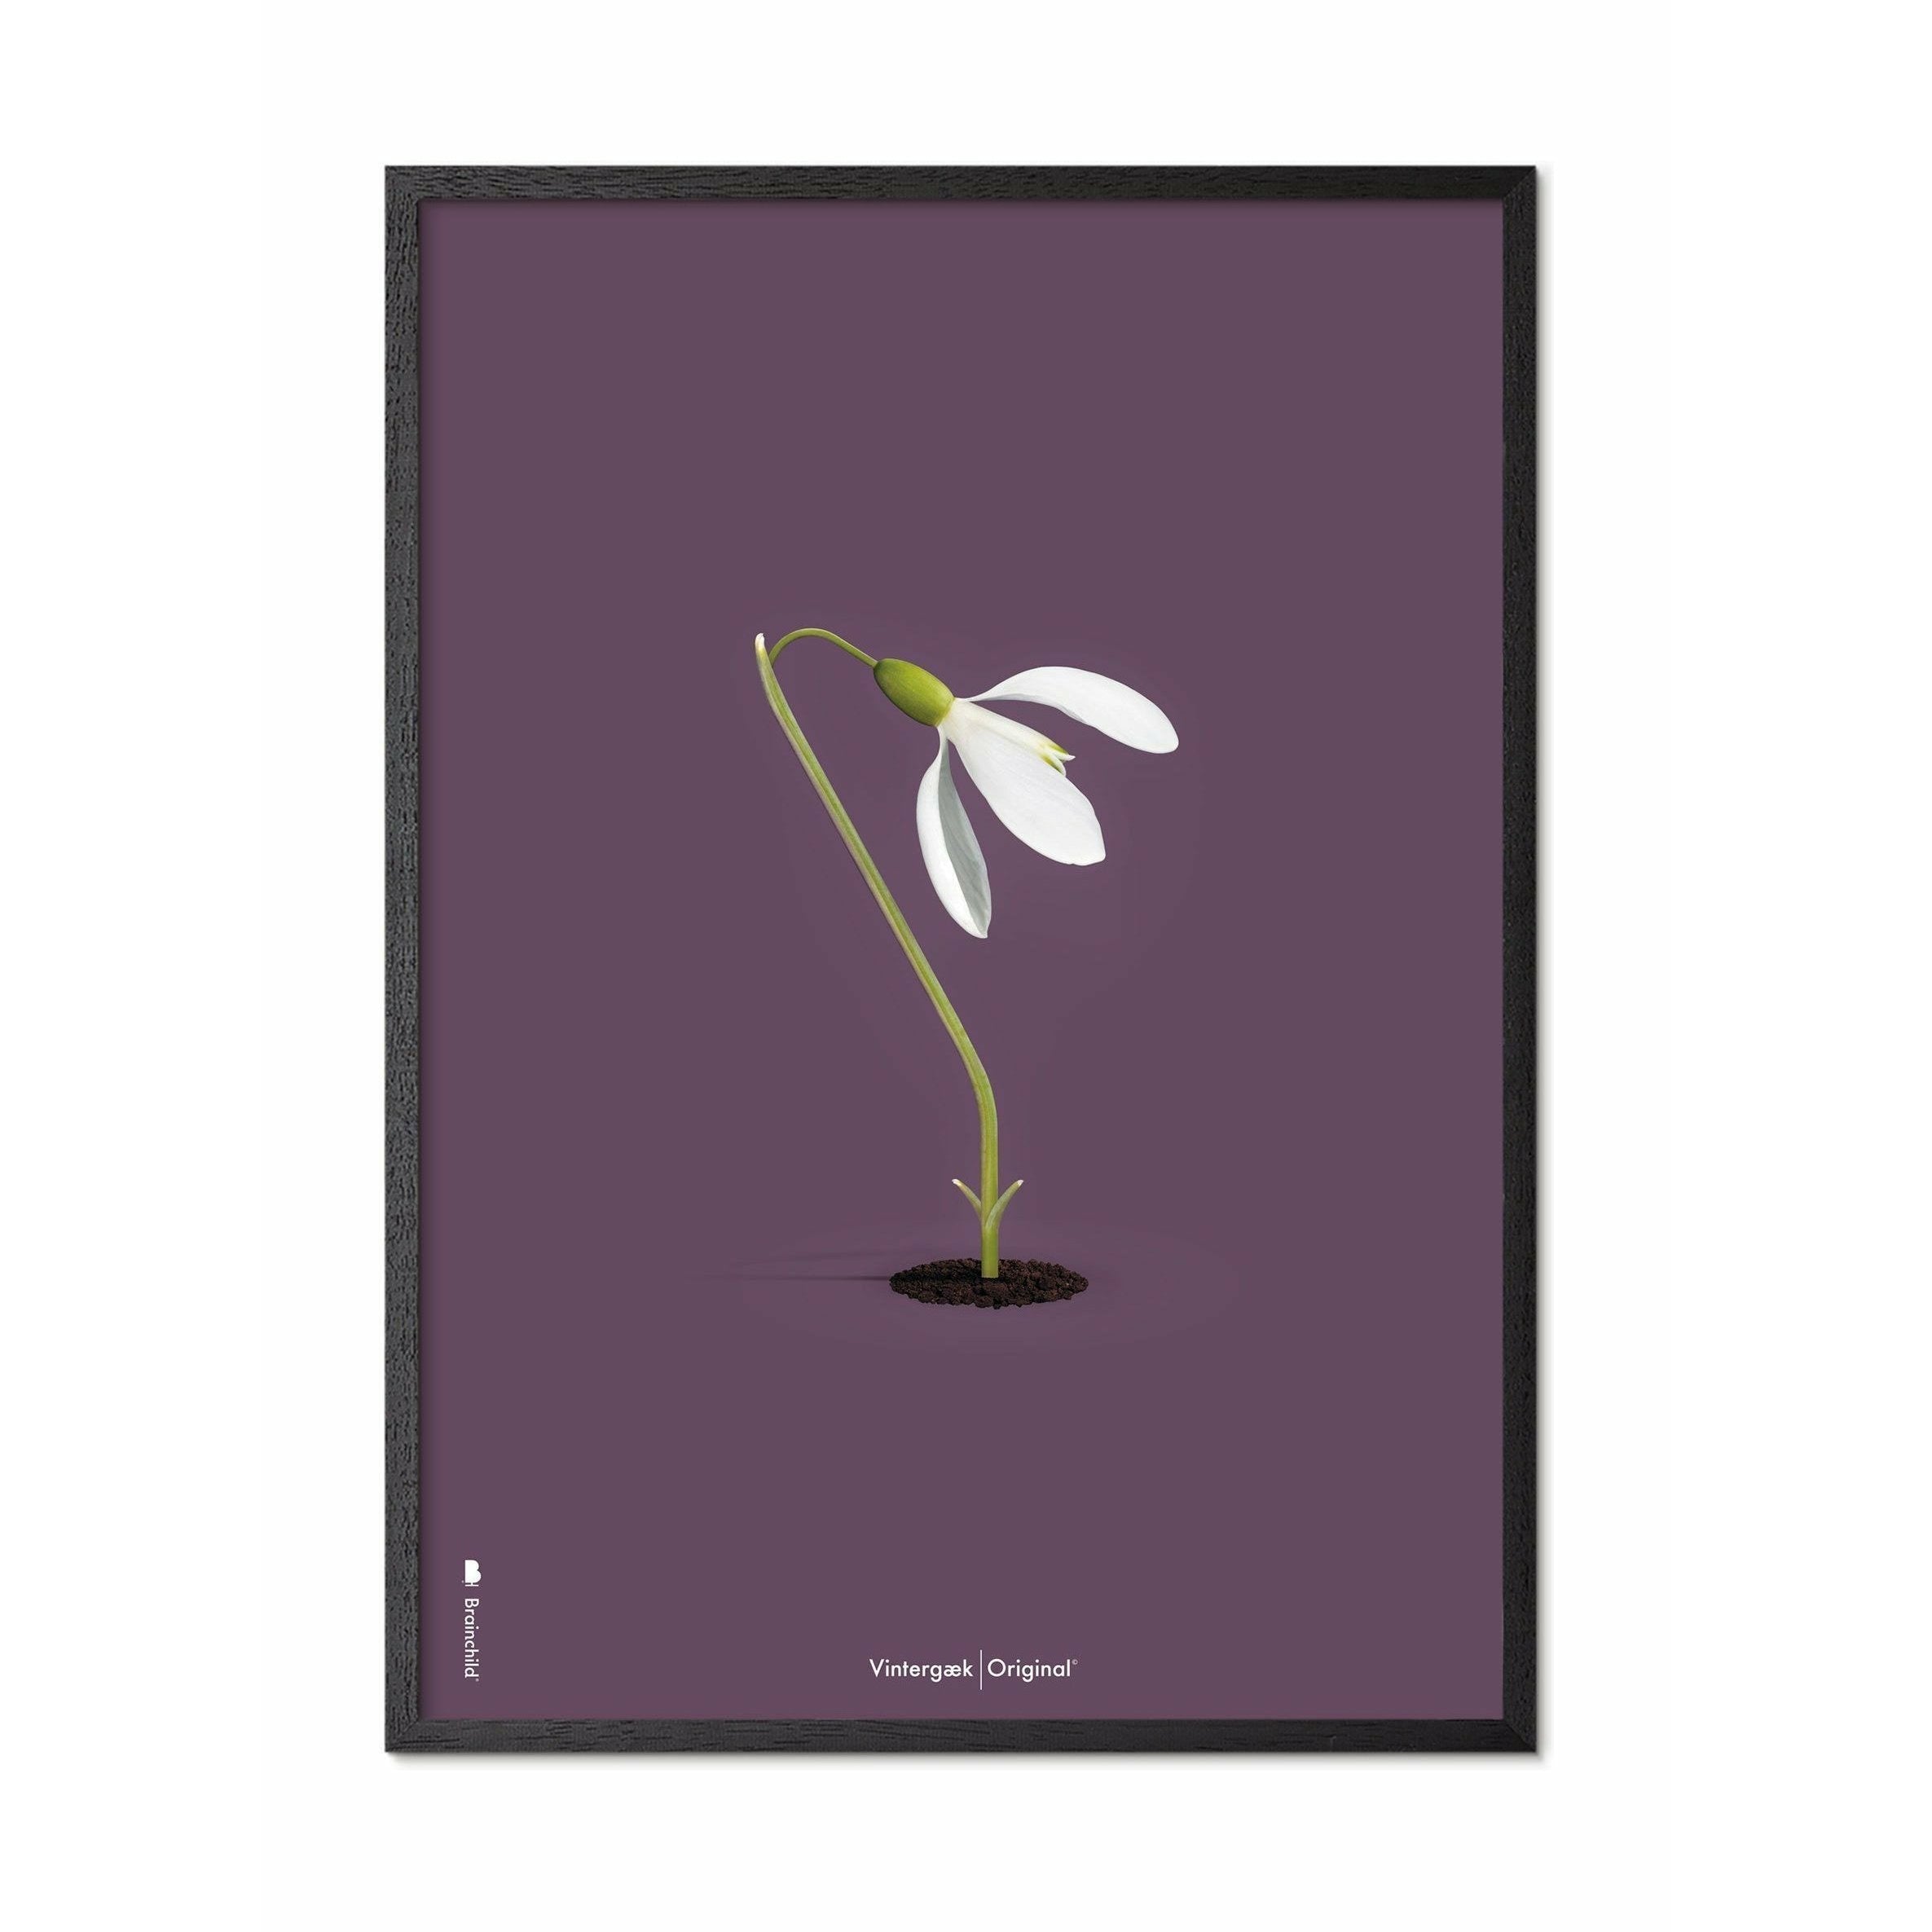 Brainchild Snowdrop Classic Poster, Black Lacquered Wood Frame A5, Purple Background